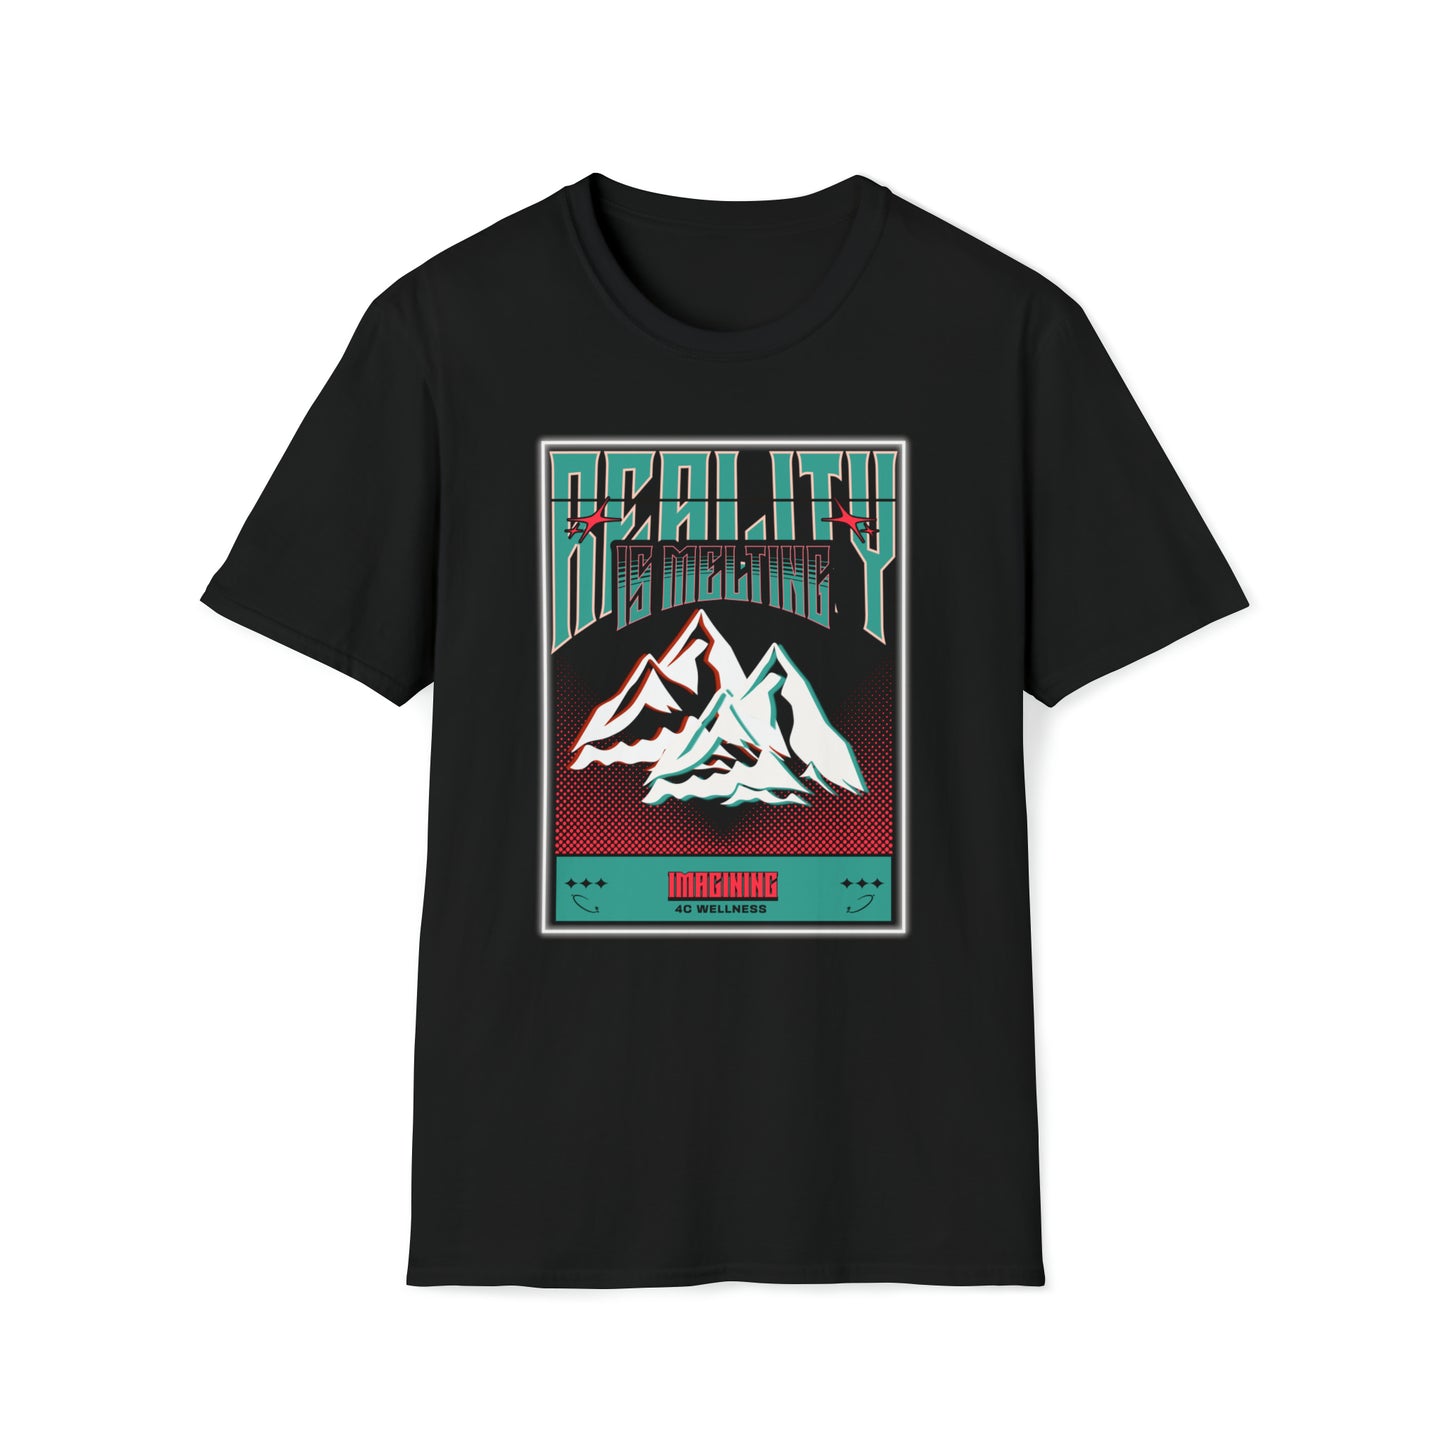 REALITY IS MELTING - GRAPHIC T-SHIRT